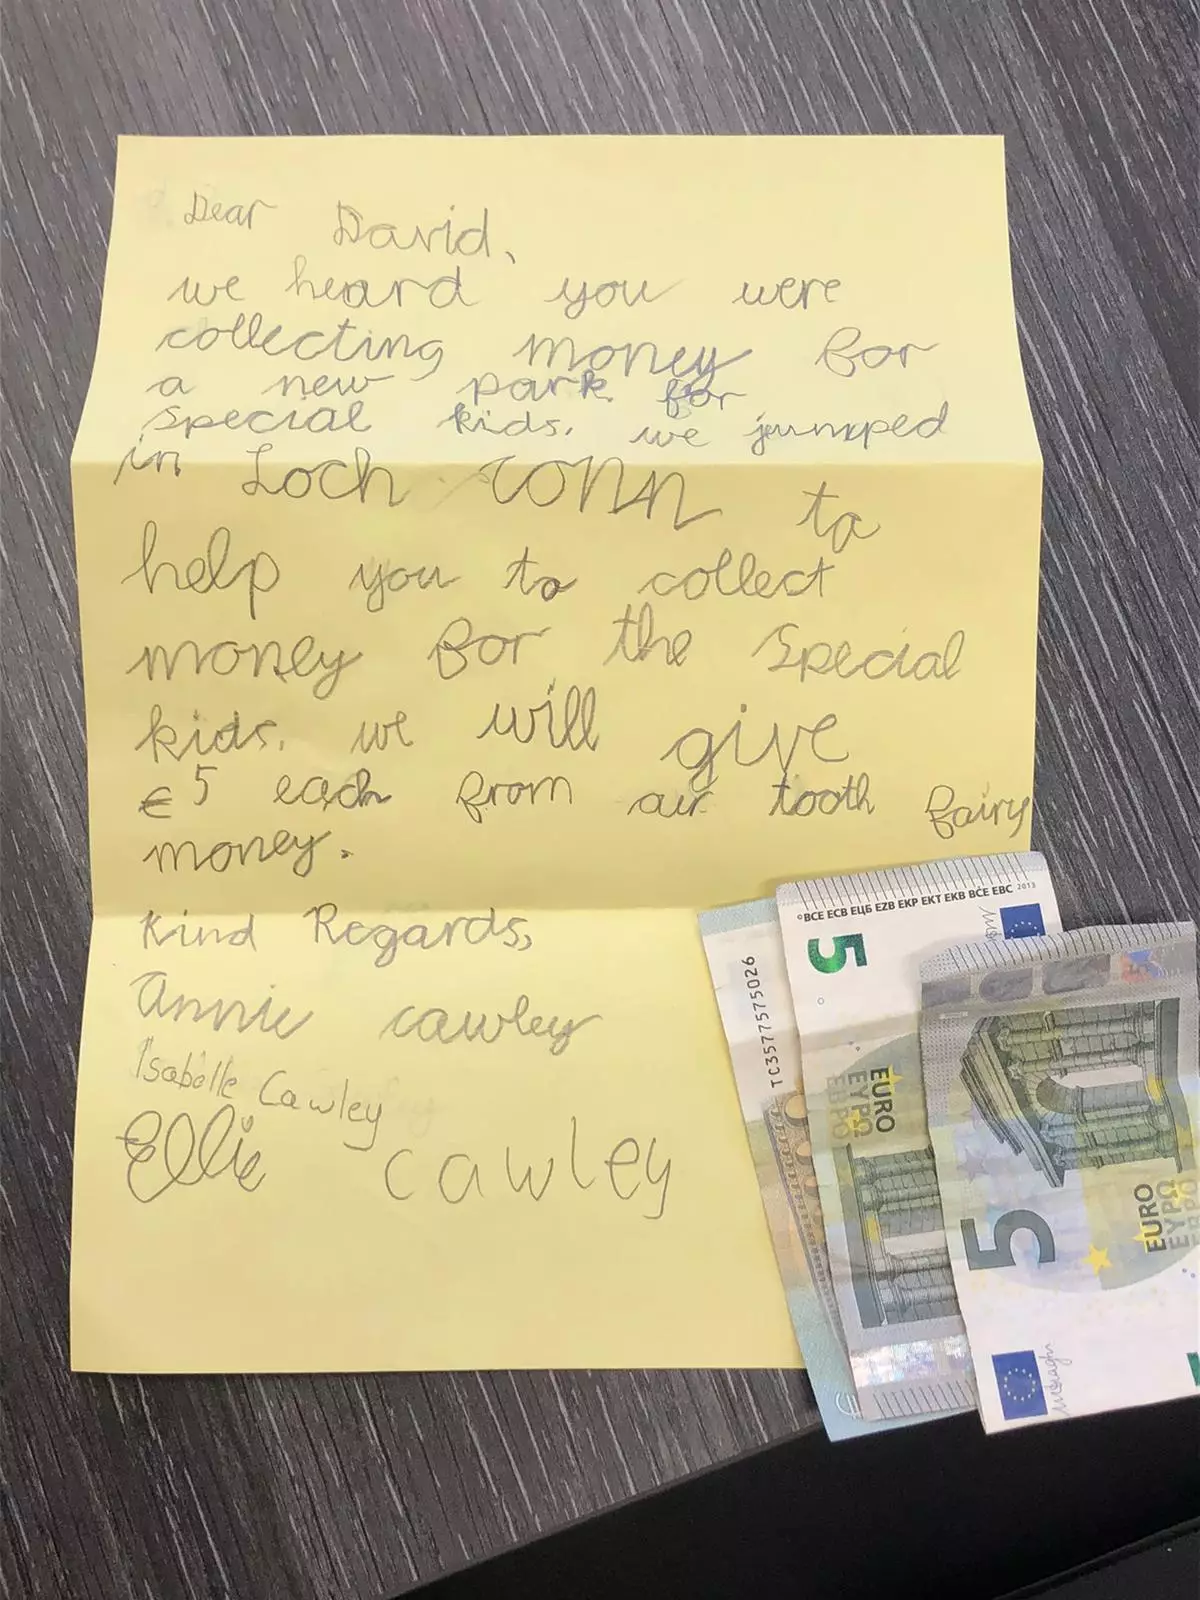 Here’s Why These Mayo Kids Have Given Up Their Tooth Fairy Money For Charity